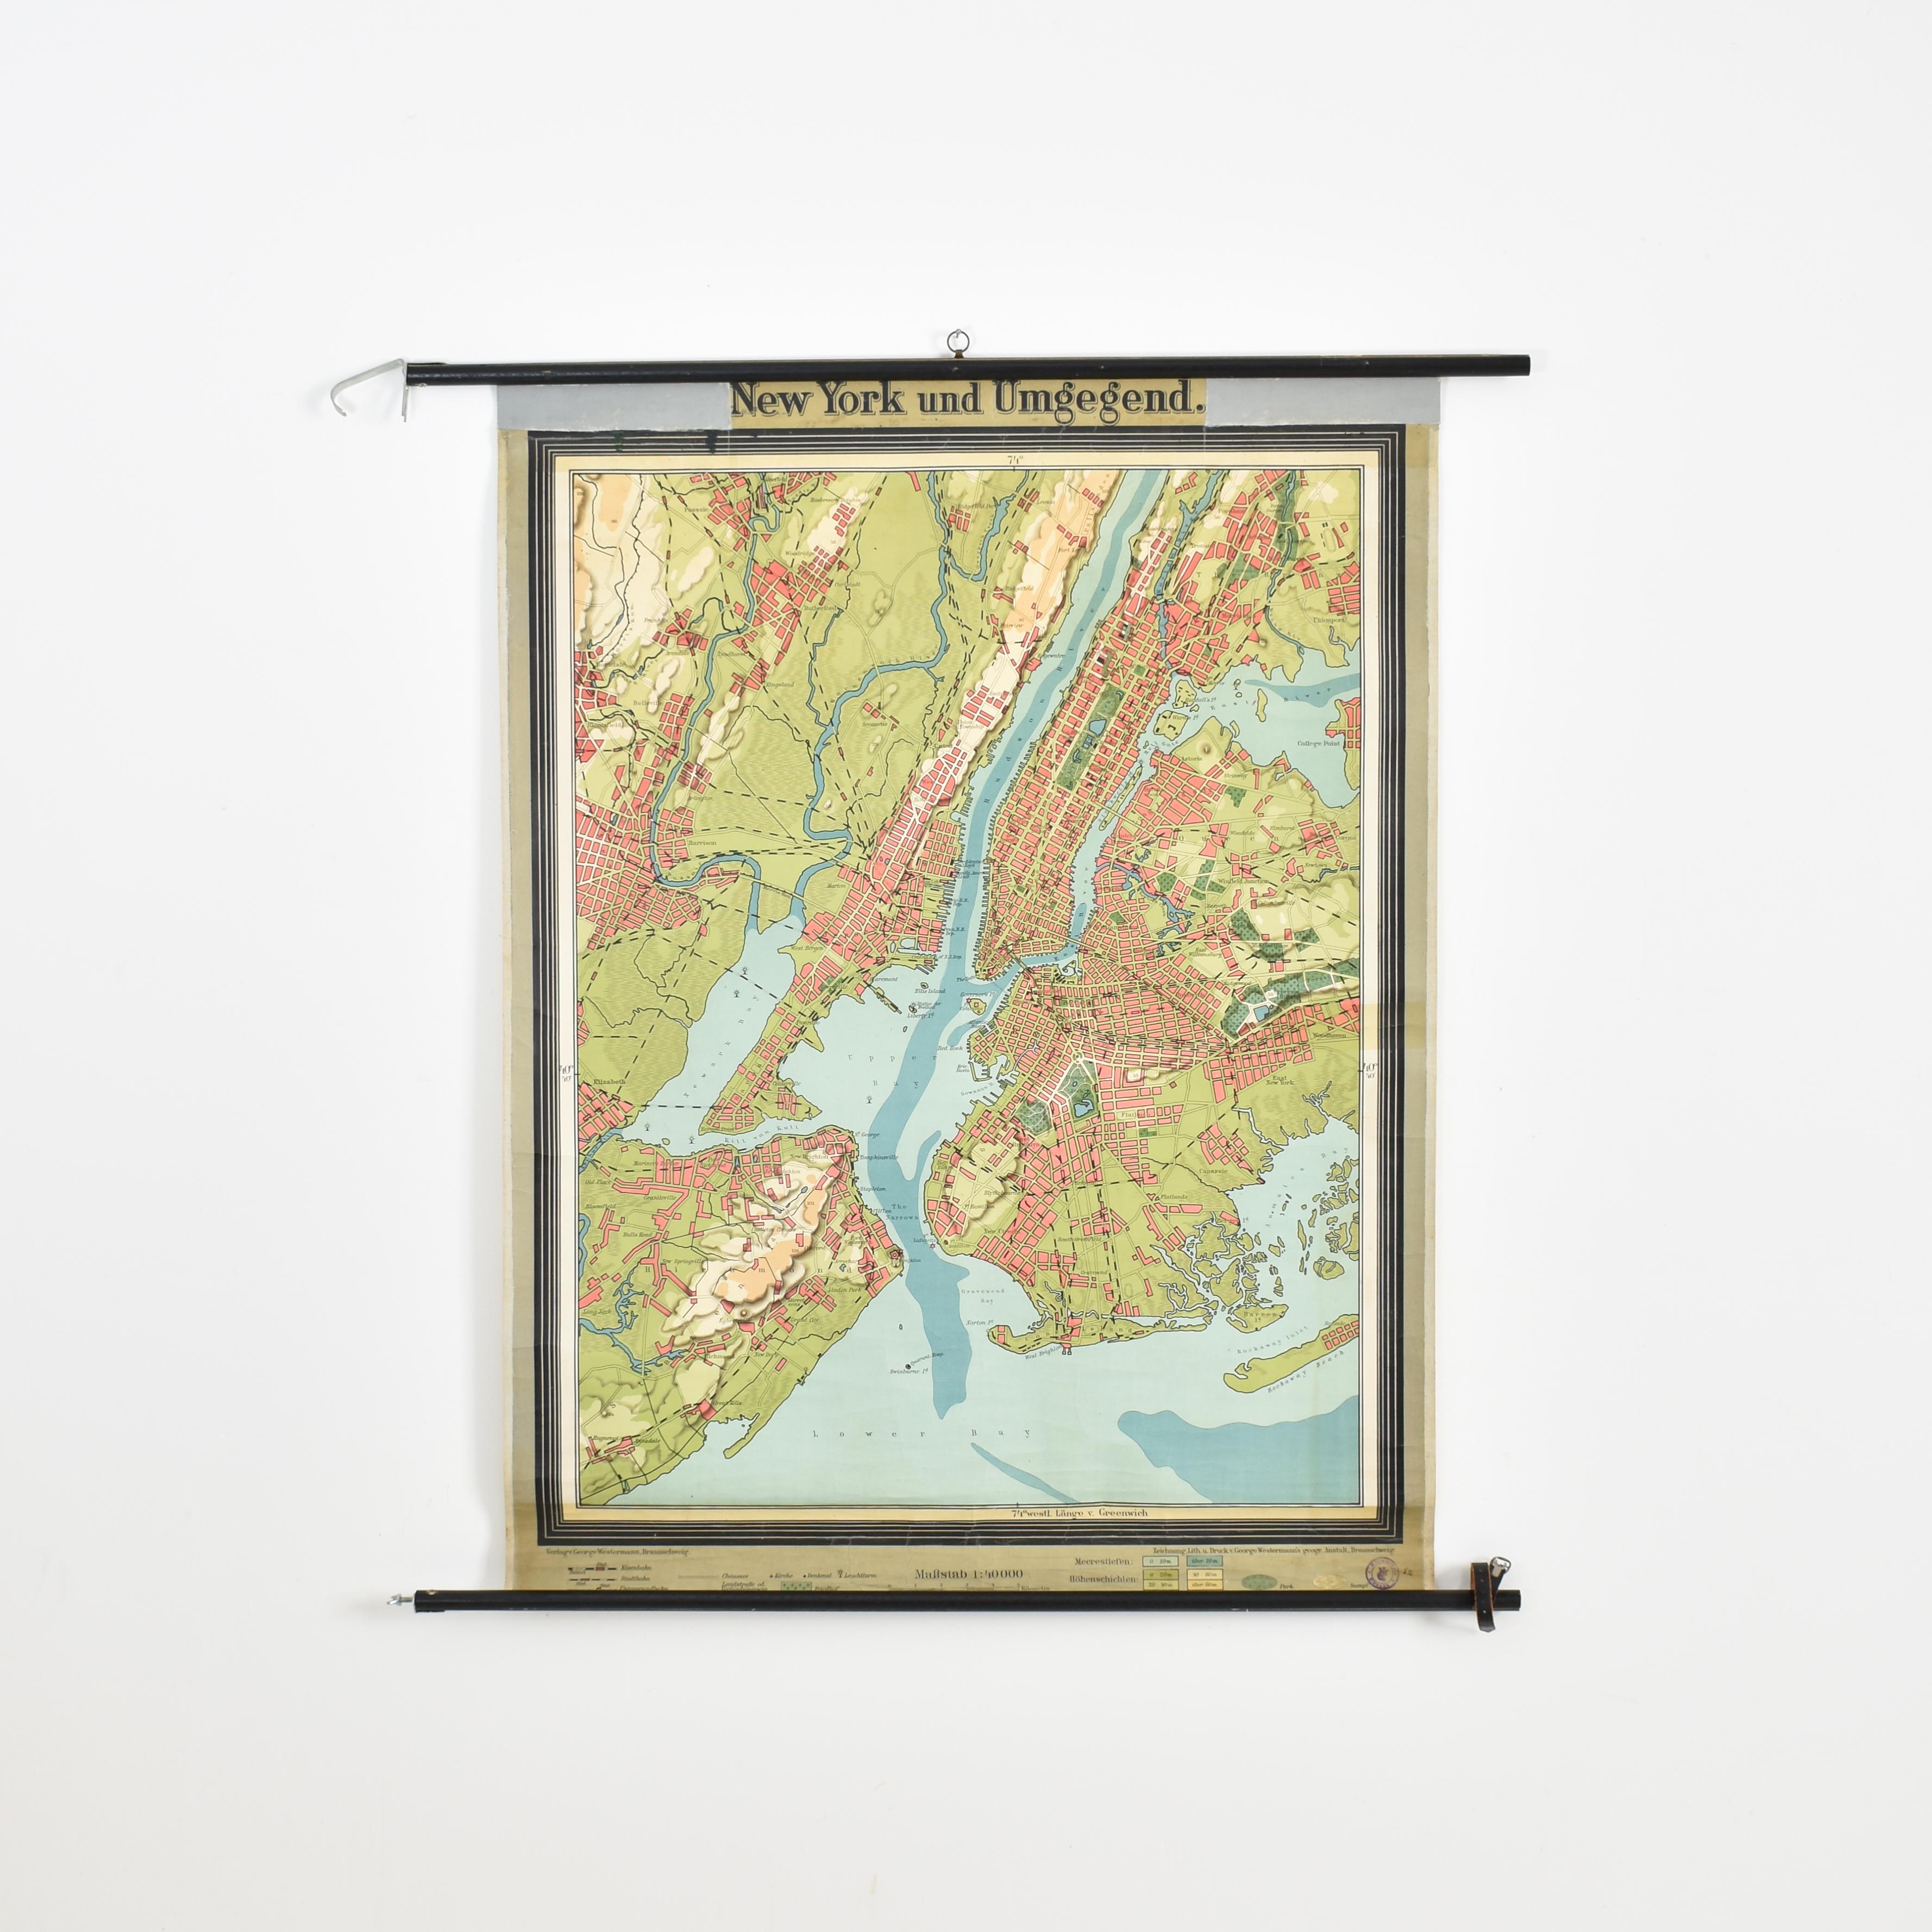 Antique New York Map By Westermann

A rare early school pull down wall map of New York. The map shows the city of New York and its suburbs. Printed in vibrant colours on paper which is canvas backed. There is a black wooden hanging pole and the